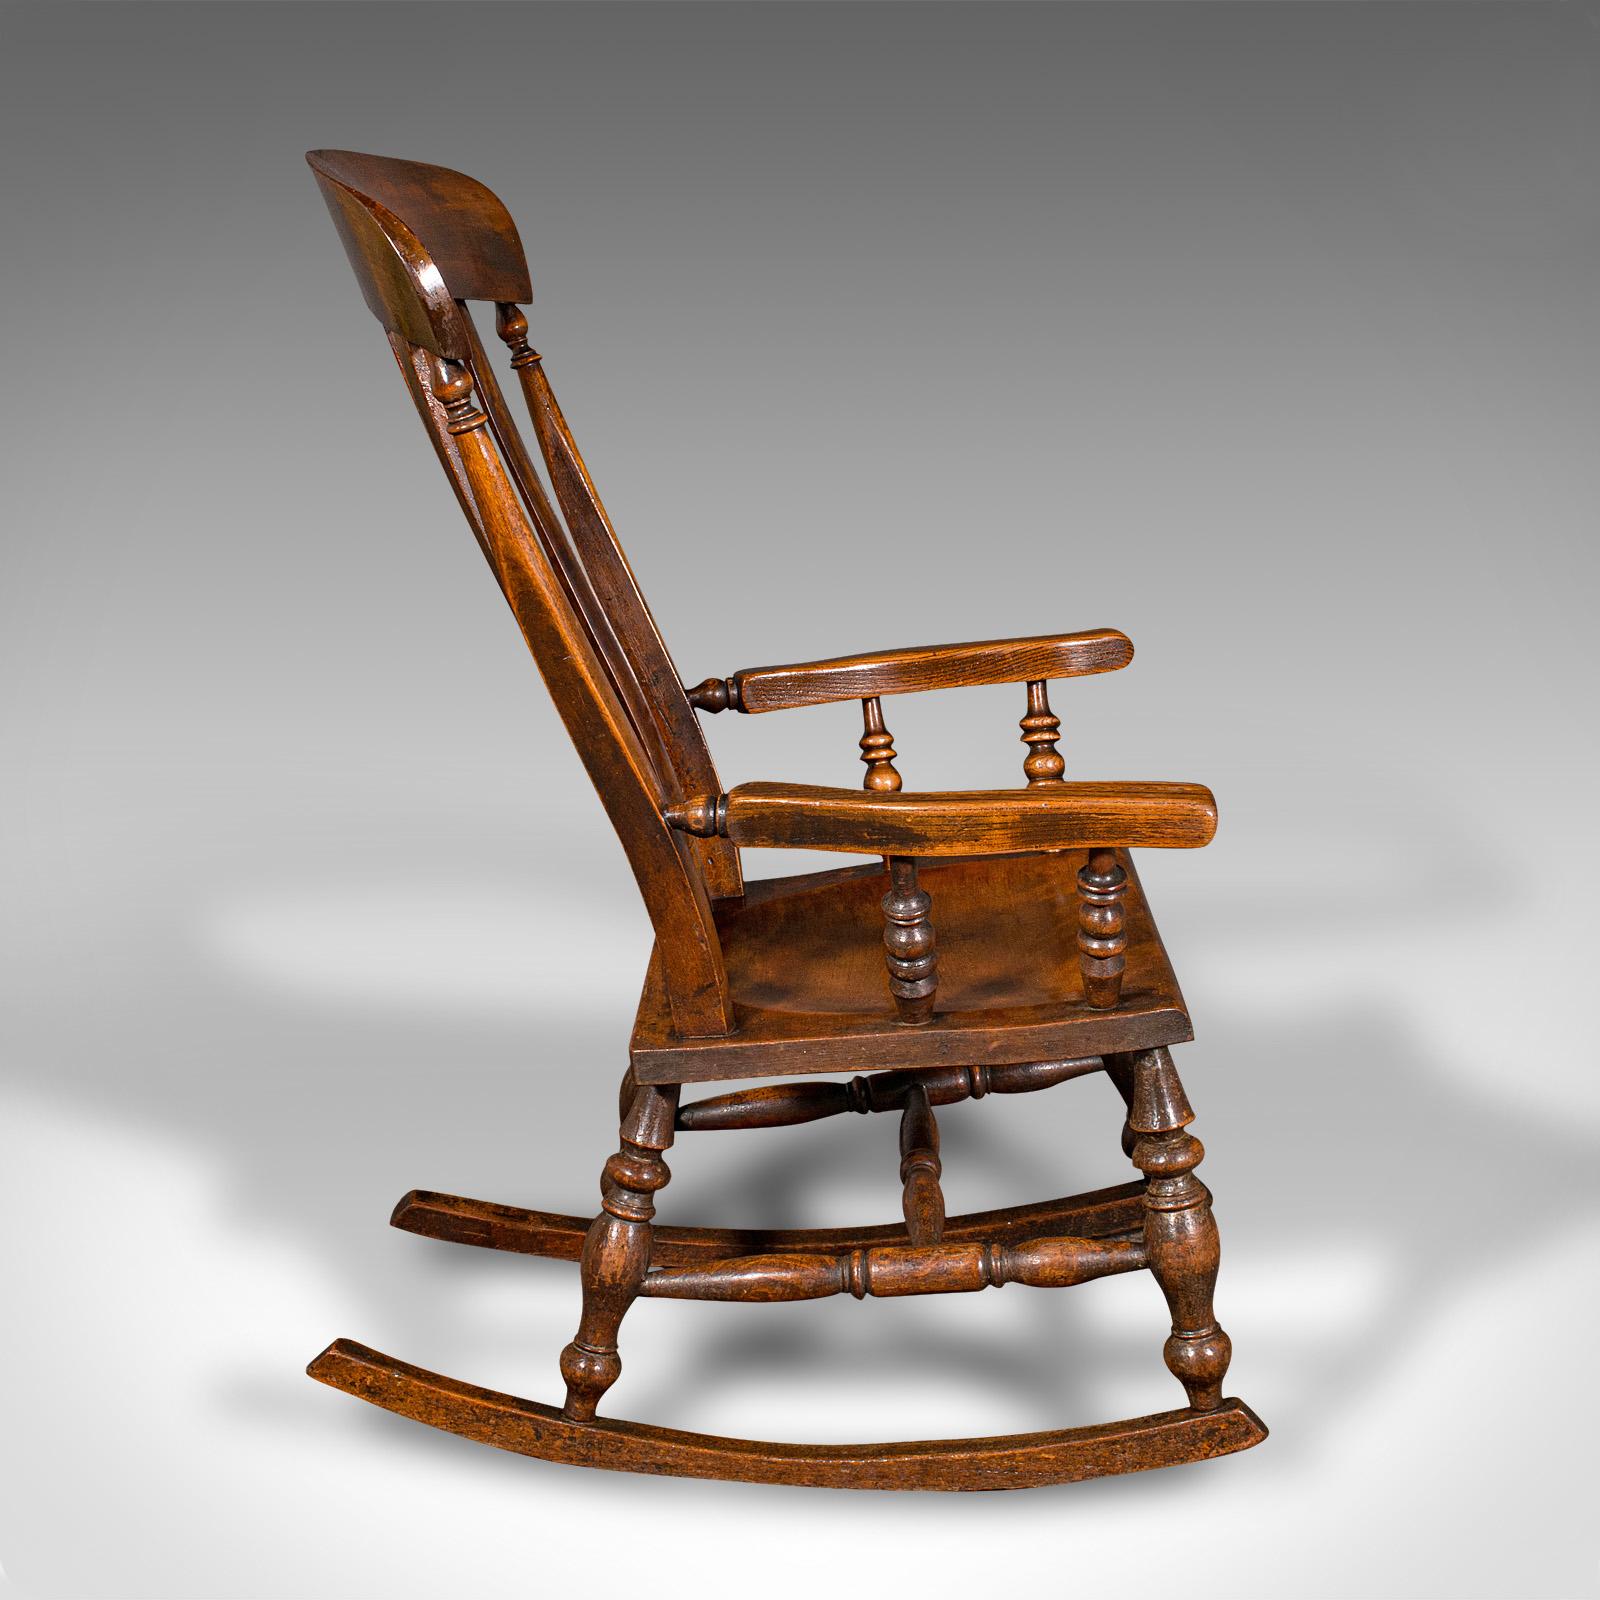 British Antique Lath Back Rocking Chair, English Elm, Beech, Elbow Seat, Victorian, 1880 For Sale